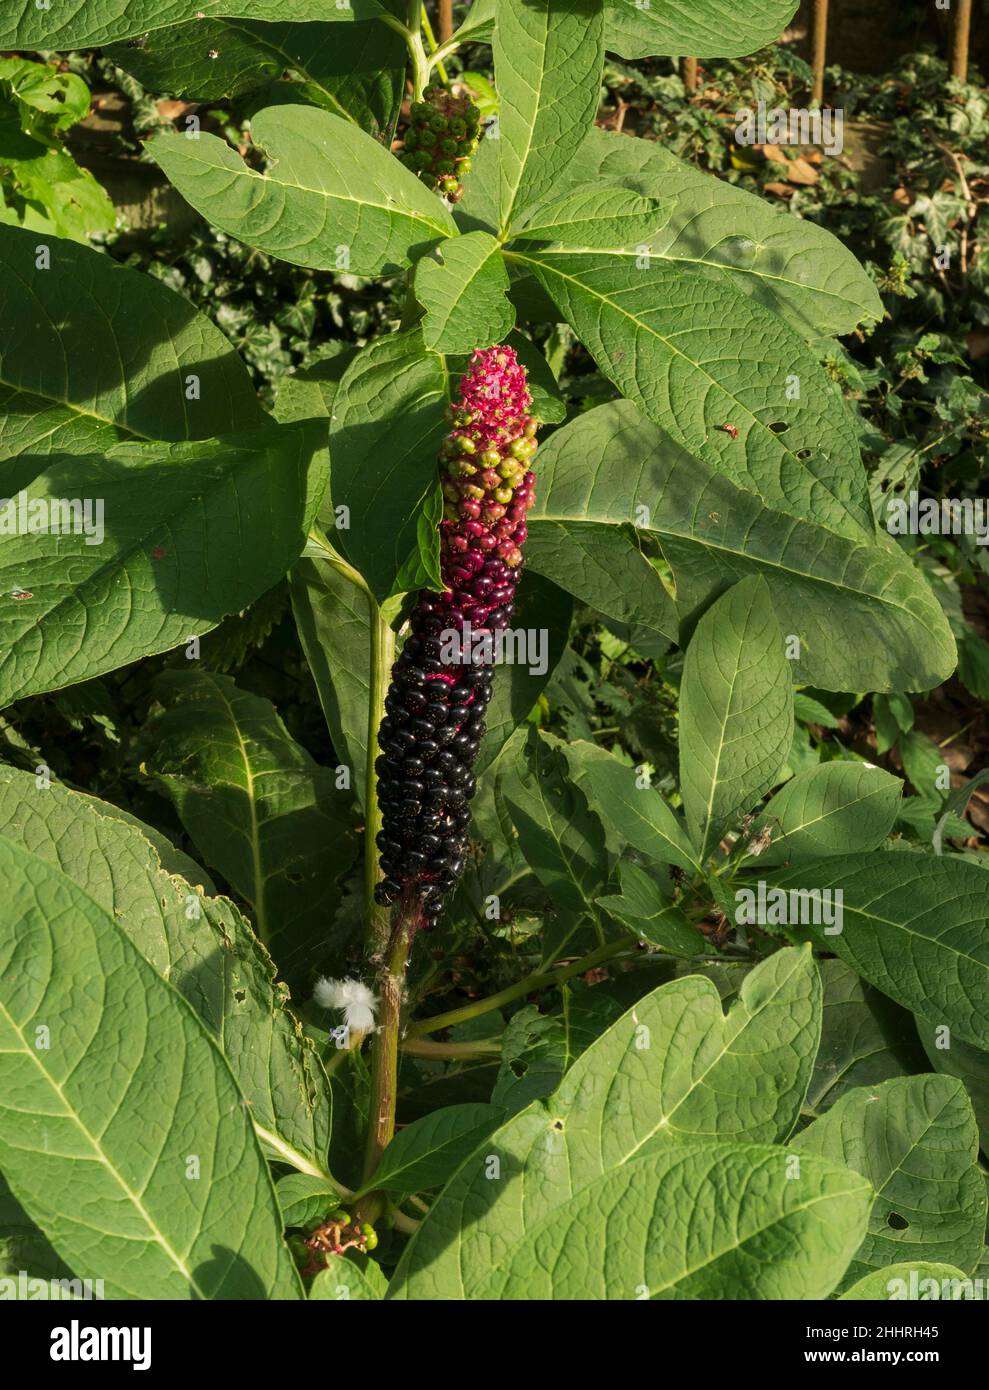 Phytolacca acinosa, Indian pokeweed - a plant native to the Himalayas found in Europan gardens. All parts are poisonous or narcotic. Stock Photo